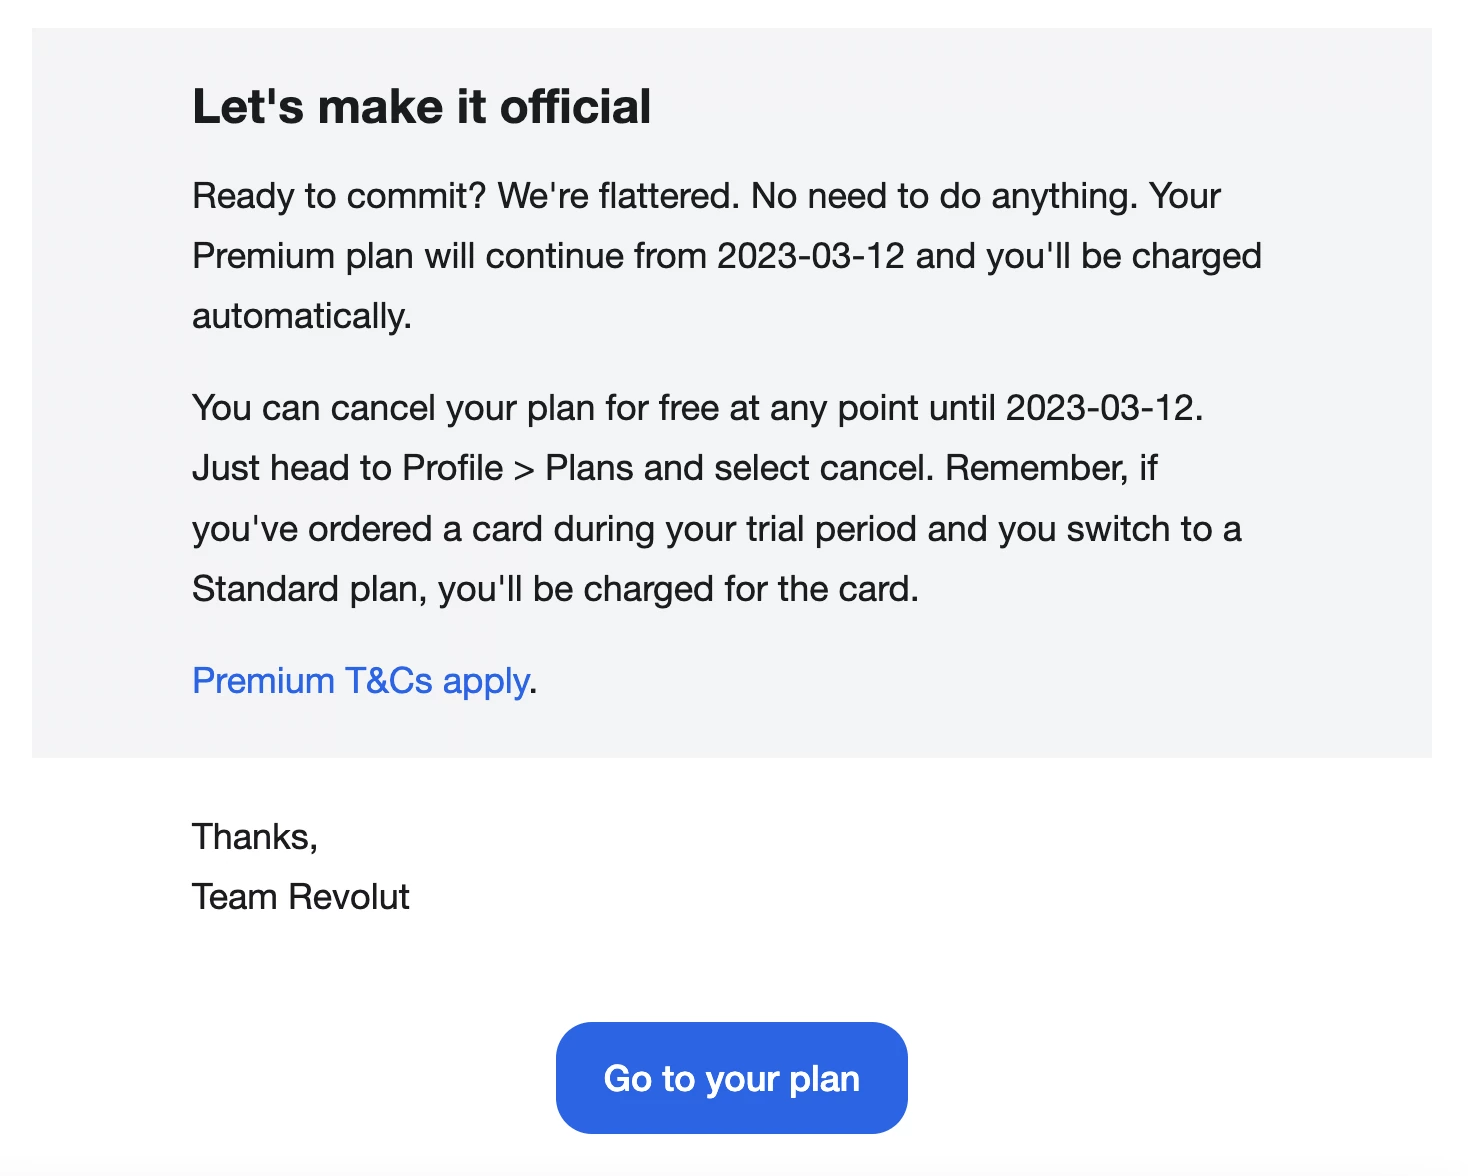 Revolut email example with the CTA.